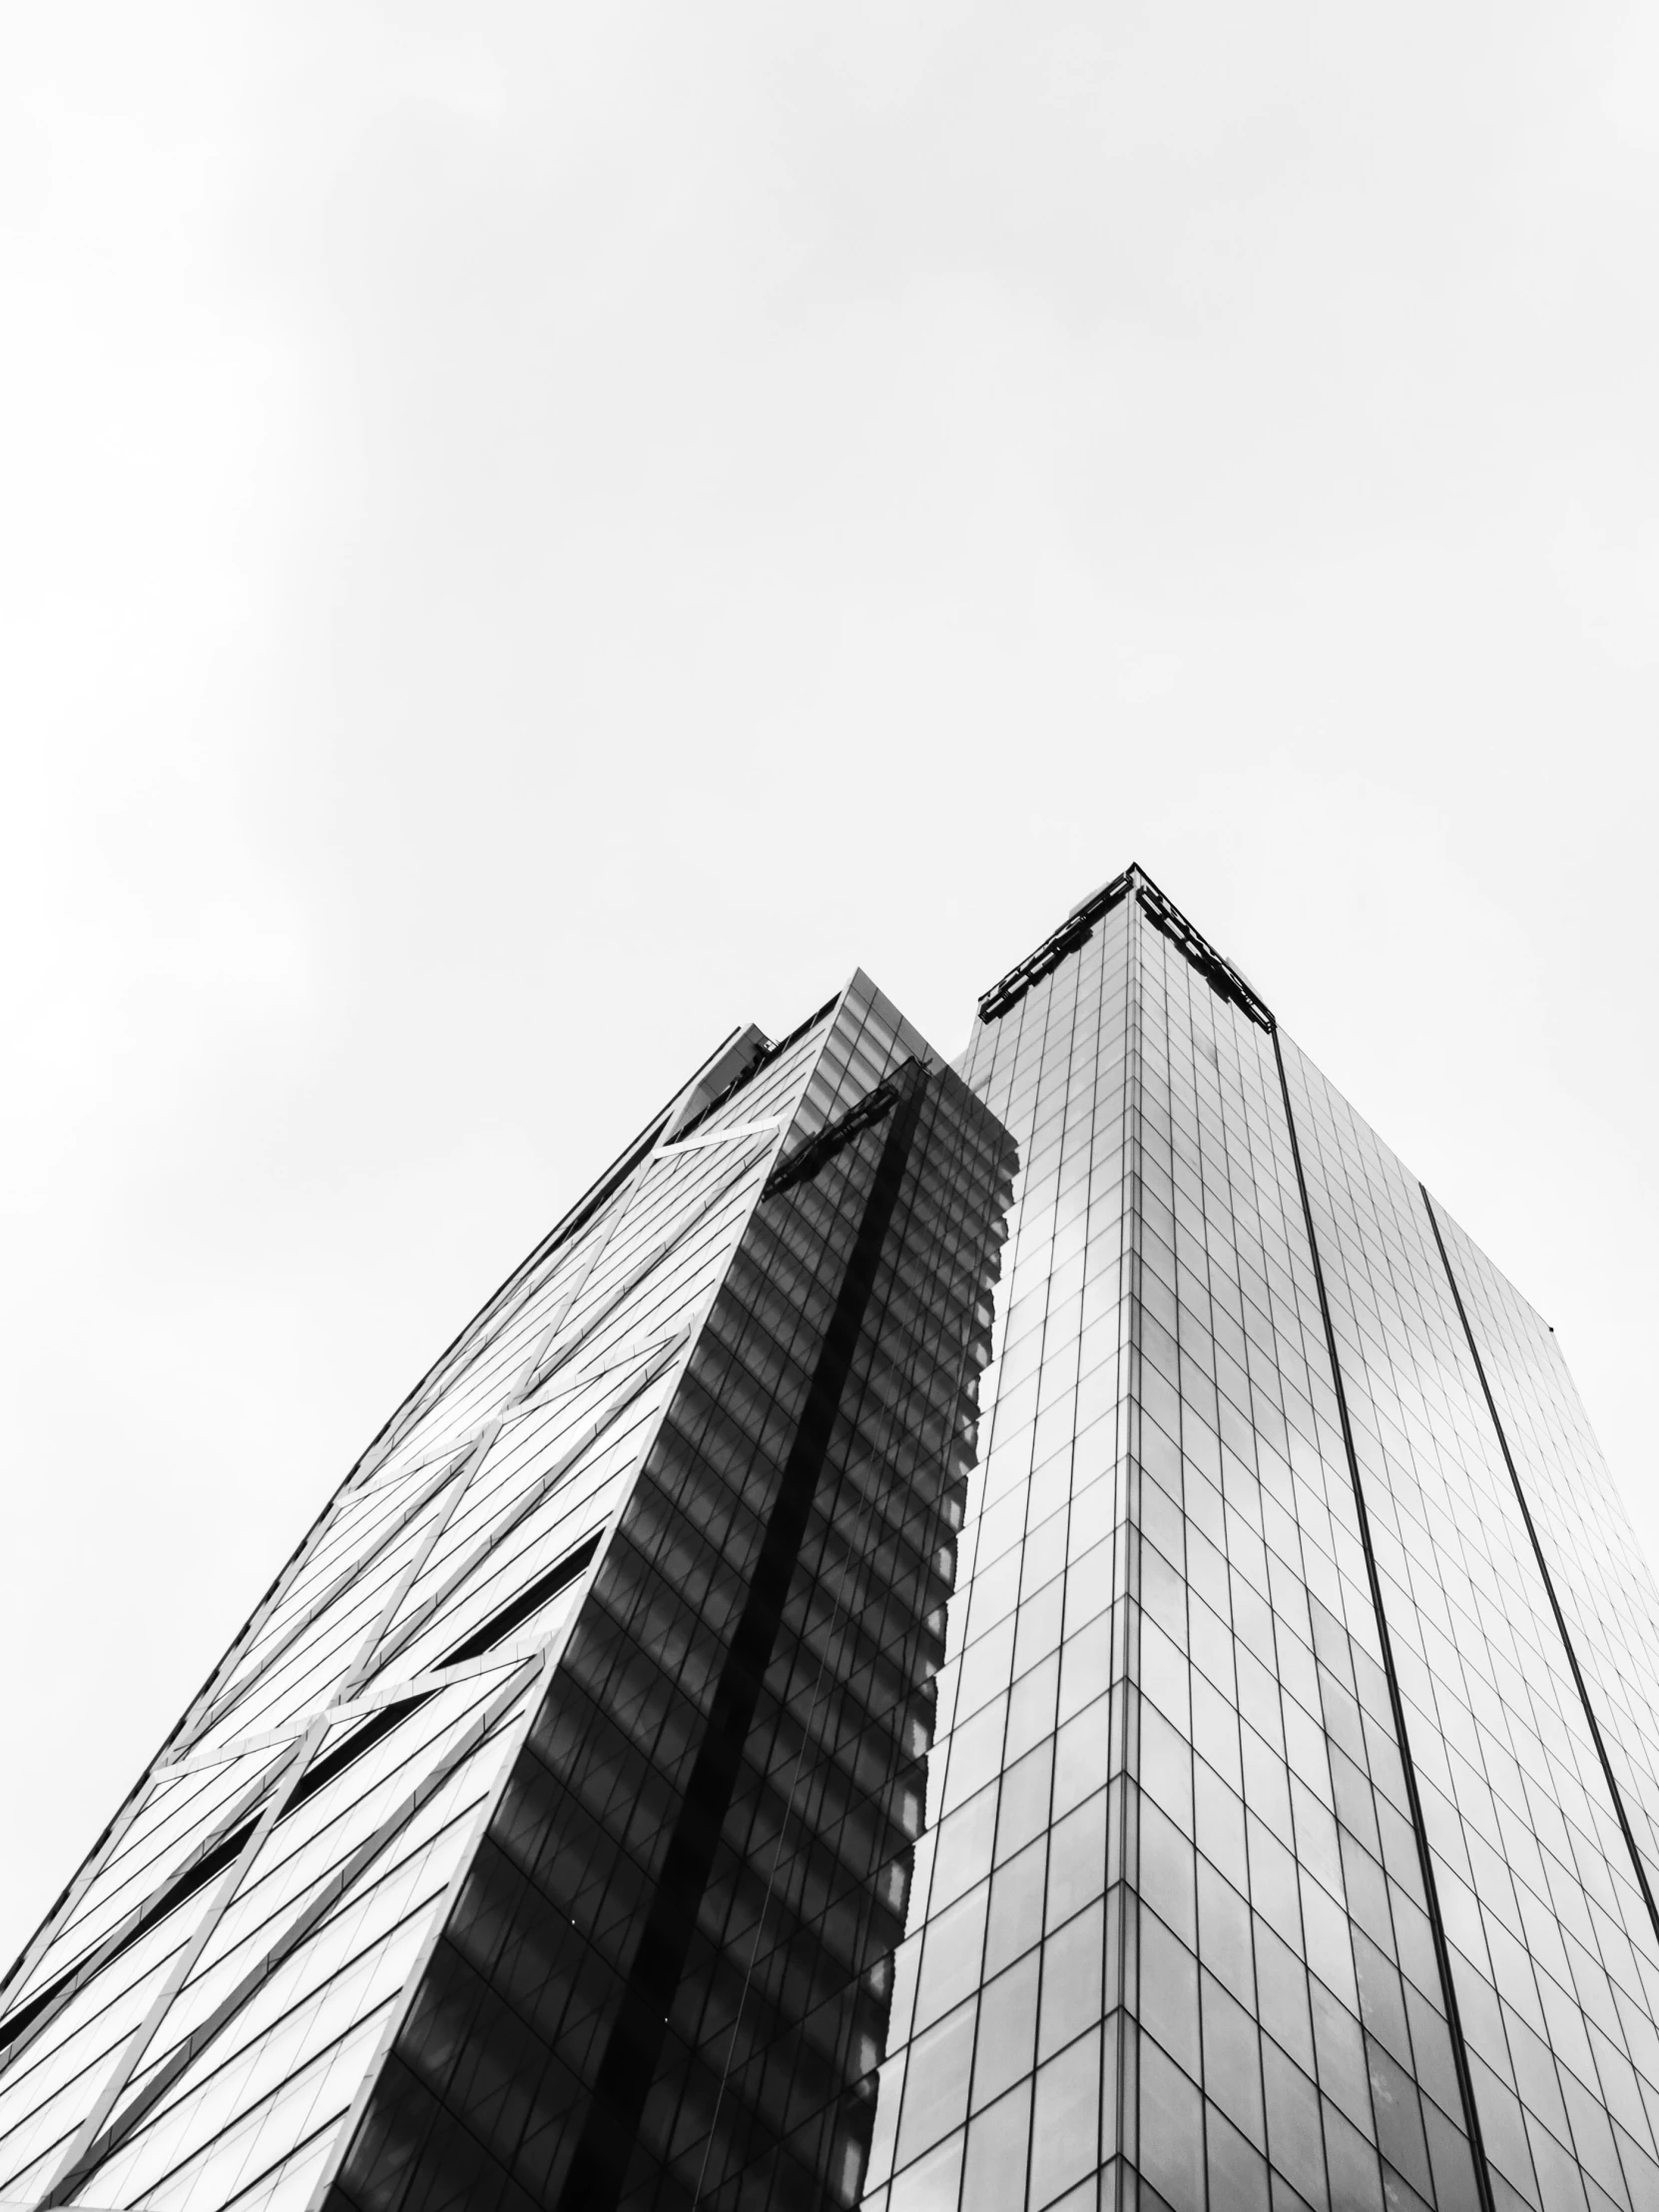 a building is standing high on a cloudy day